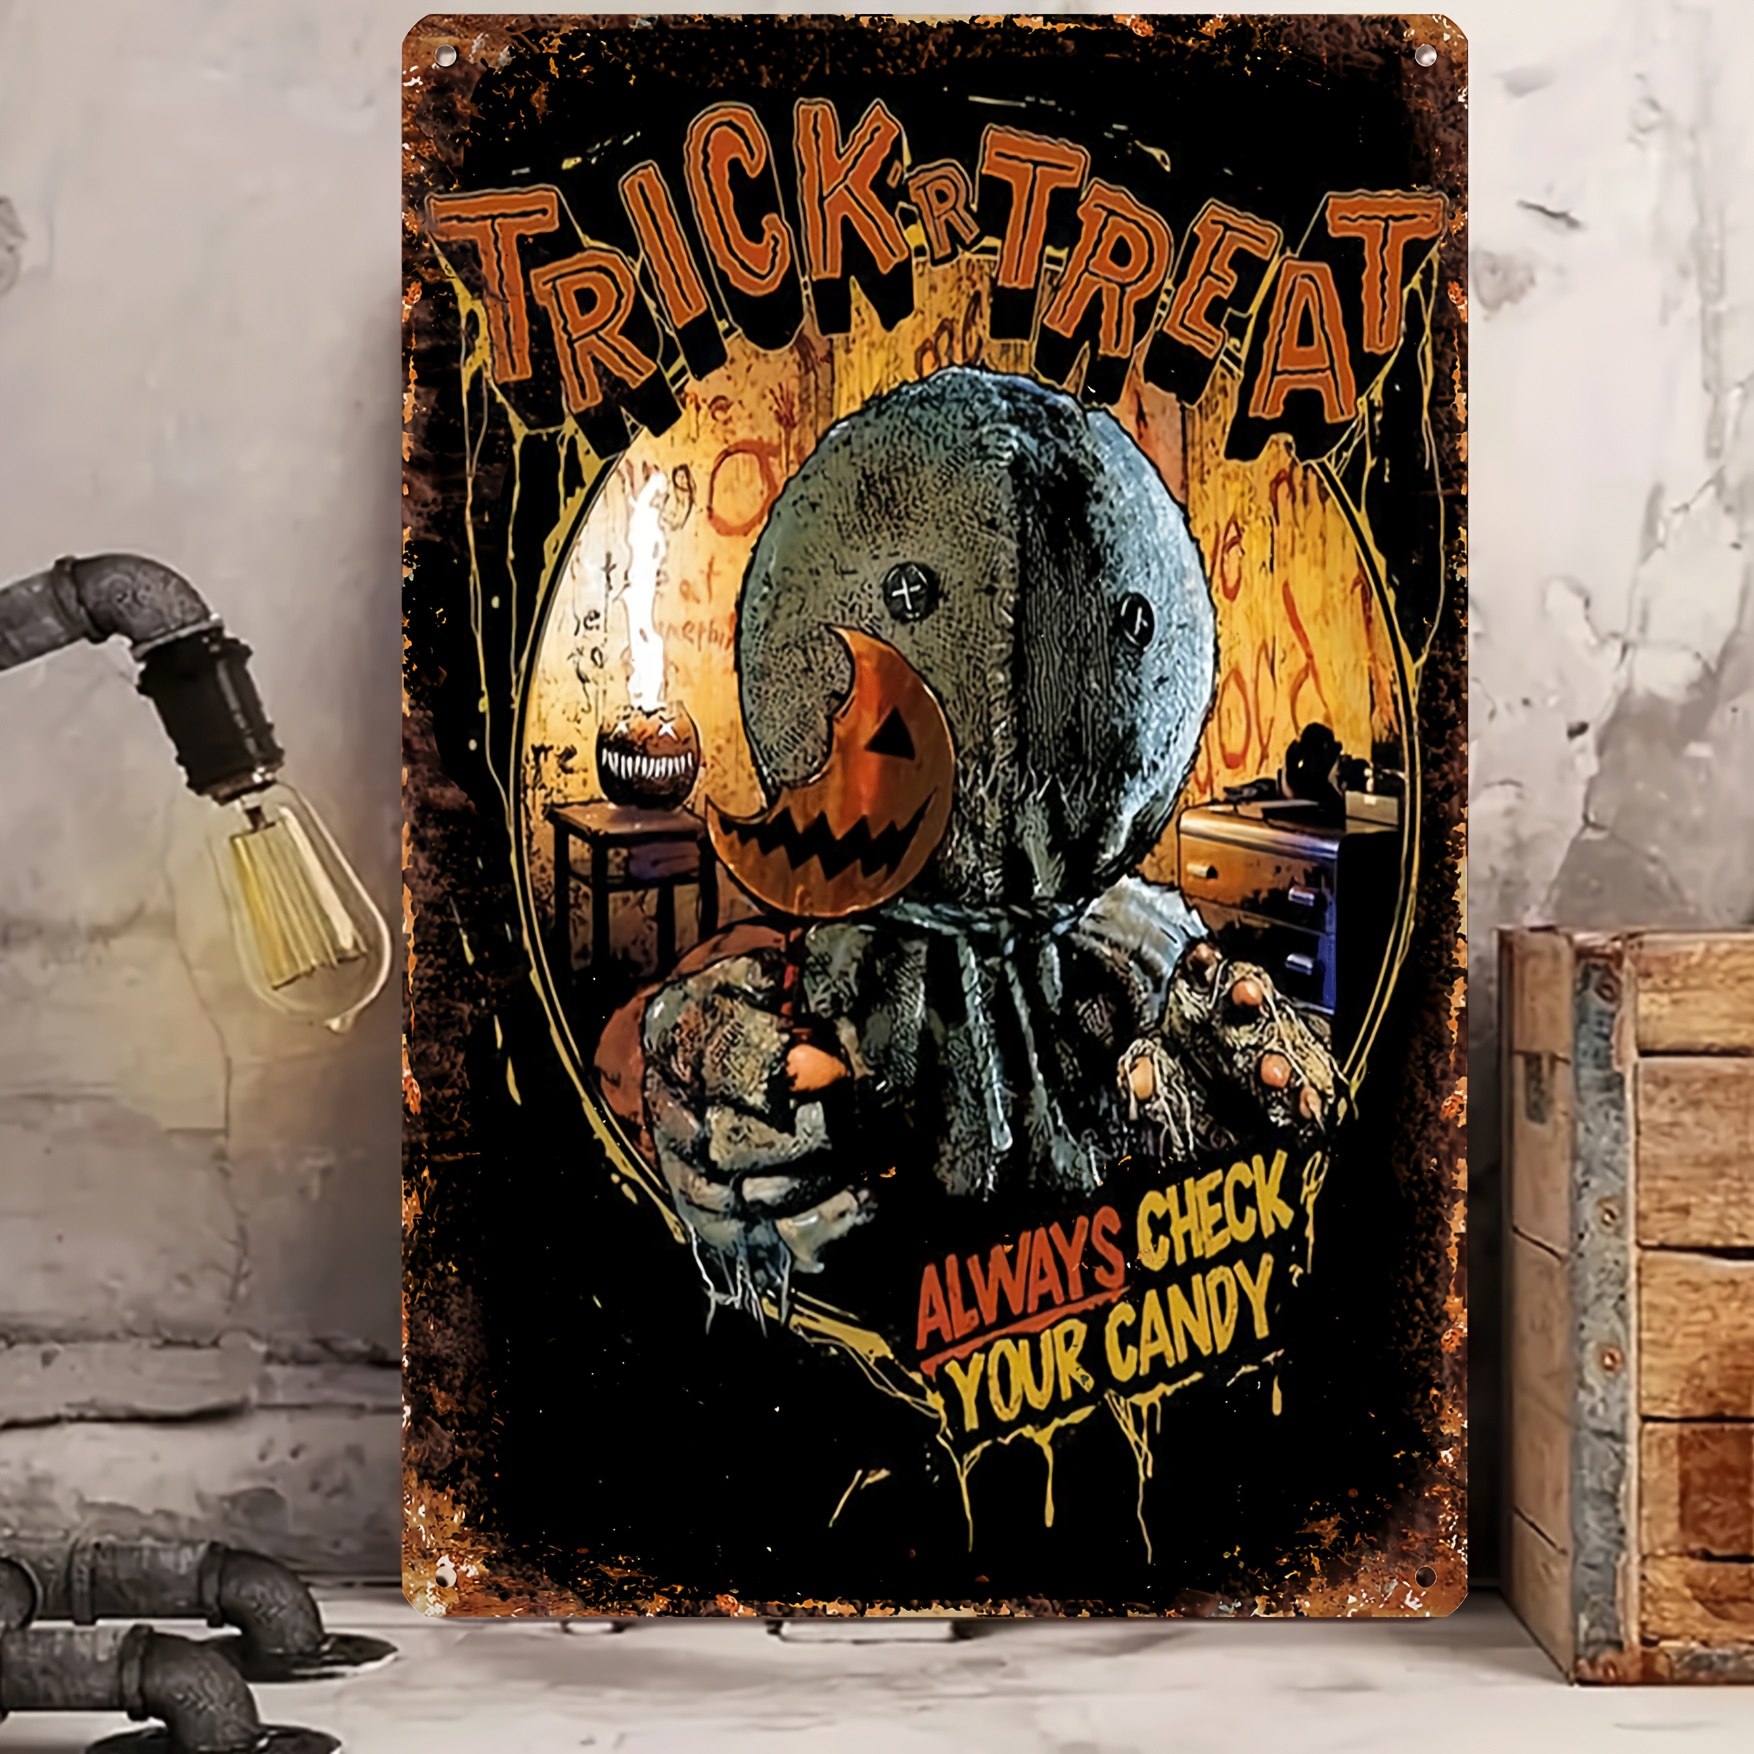 

Vintage Halloween Trick Or Treat Sign: Check Your Candy With This Rustic Aluminium Decoration